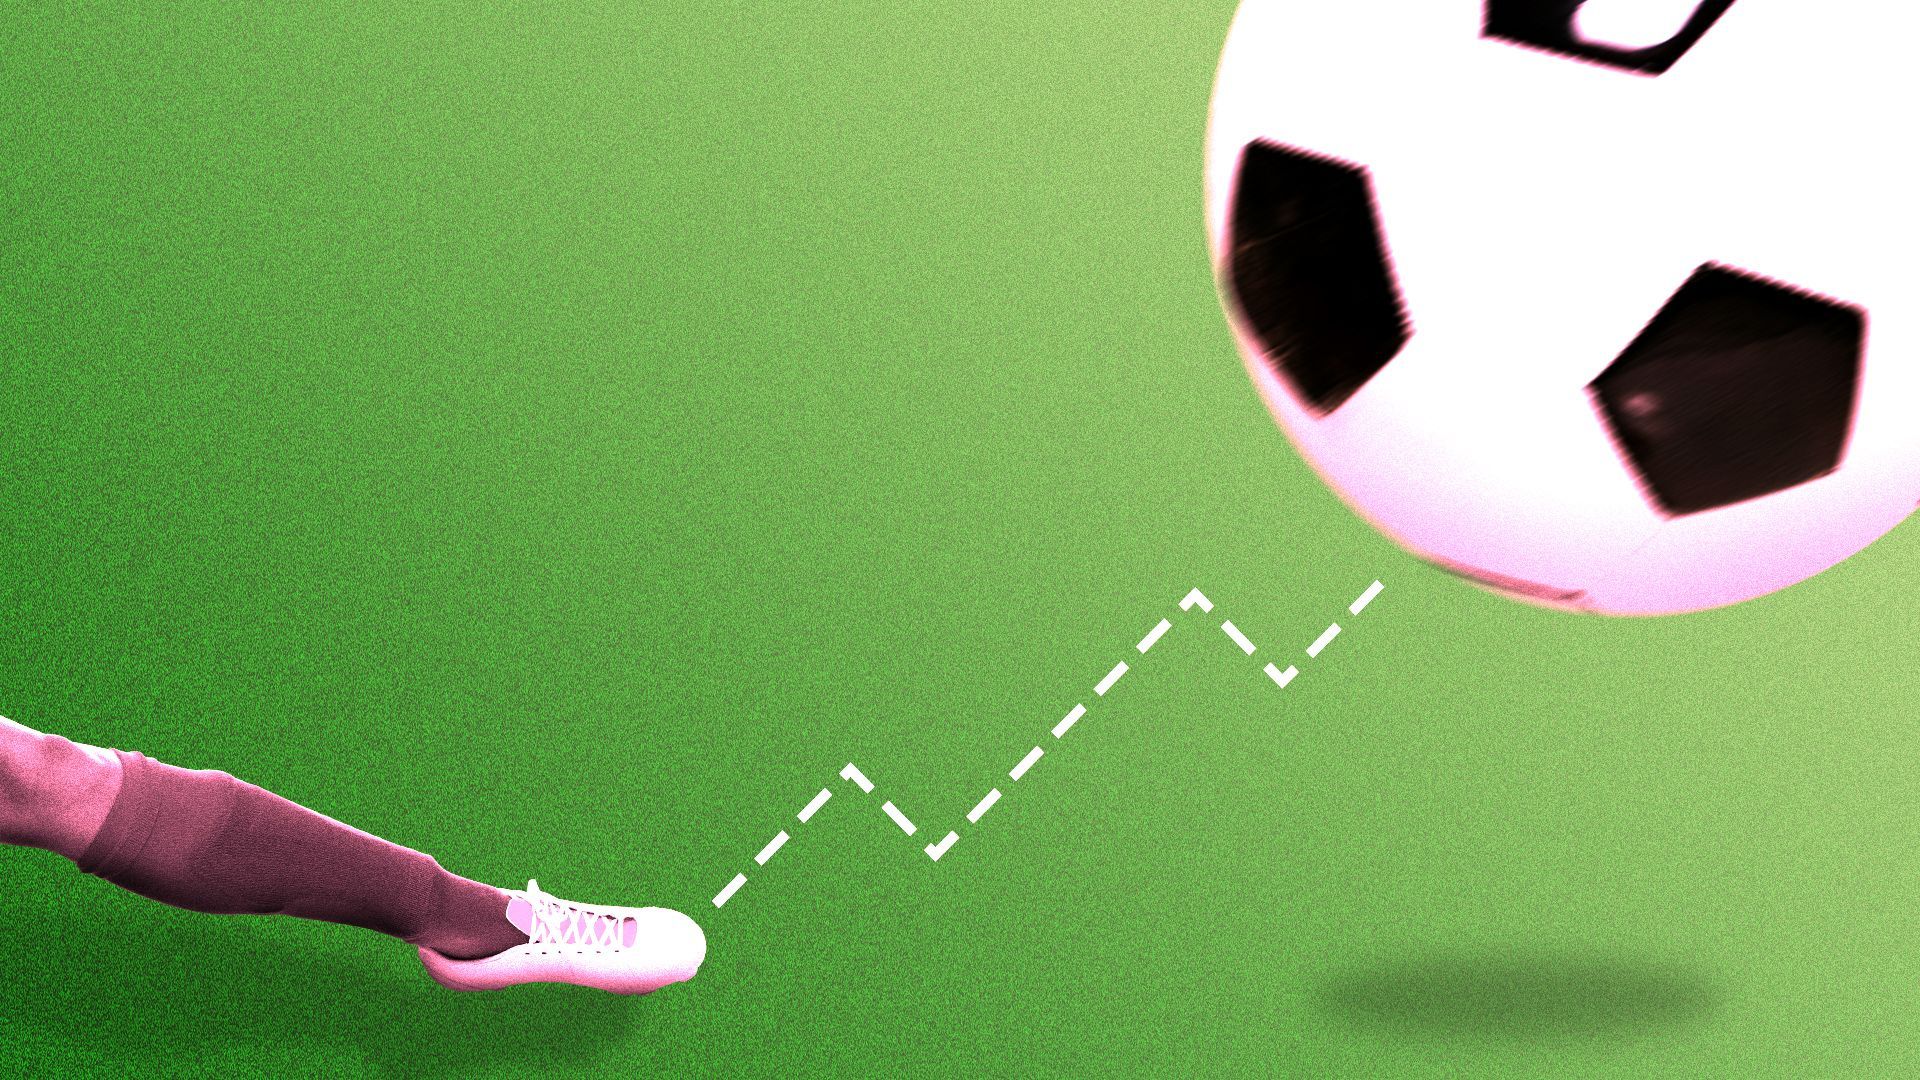 Illustration of a soccer ball being kicked along an upward trend line.